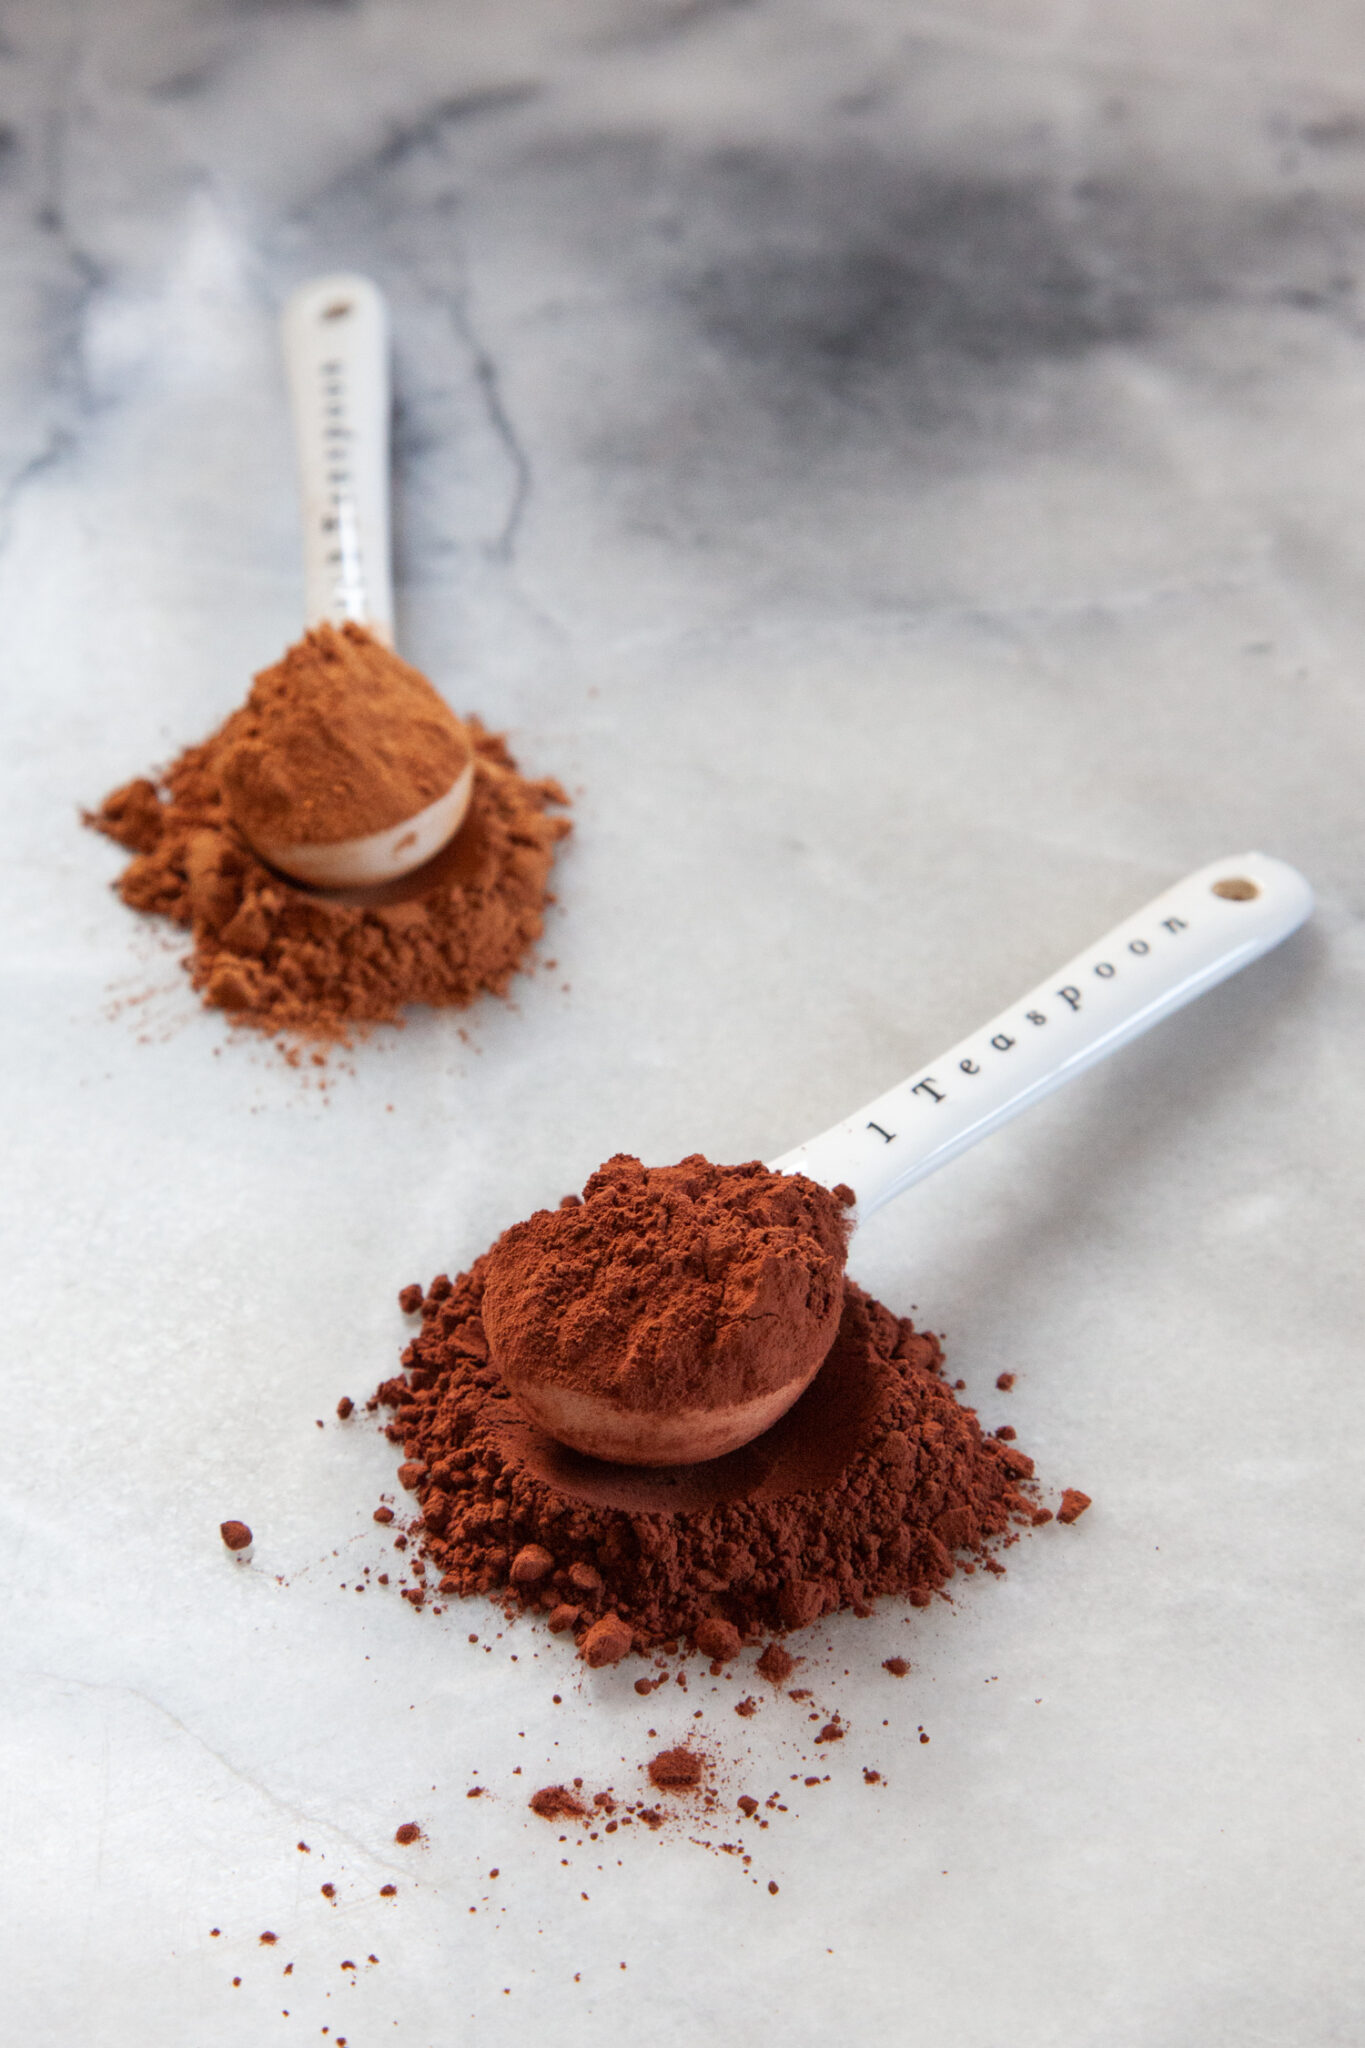 Two spoonfuls of different cocoa powder on a marble surface, with darker Dutch-processed cocoa in front, and natural cocoa powder in back.